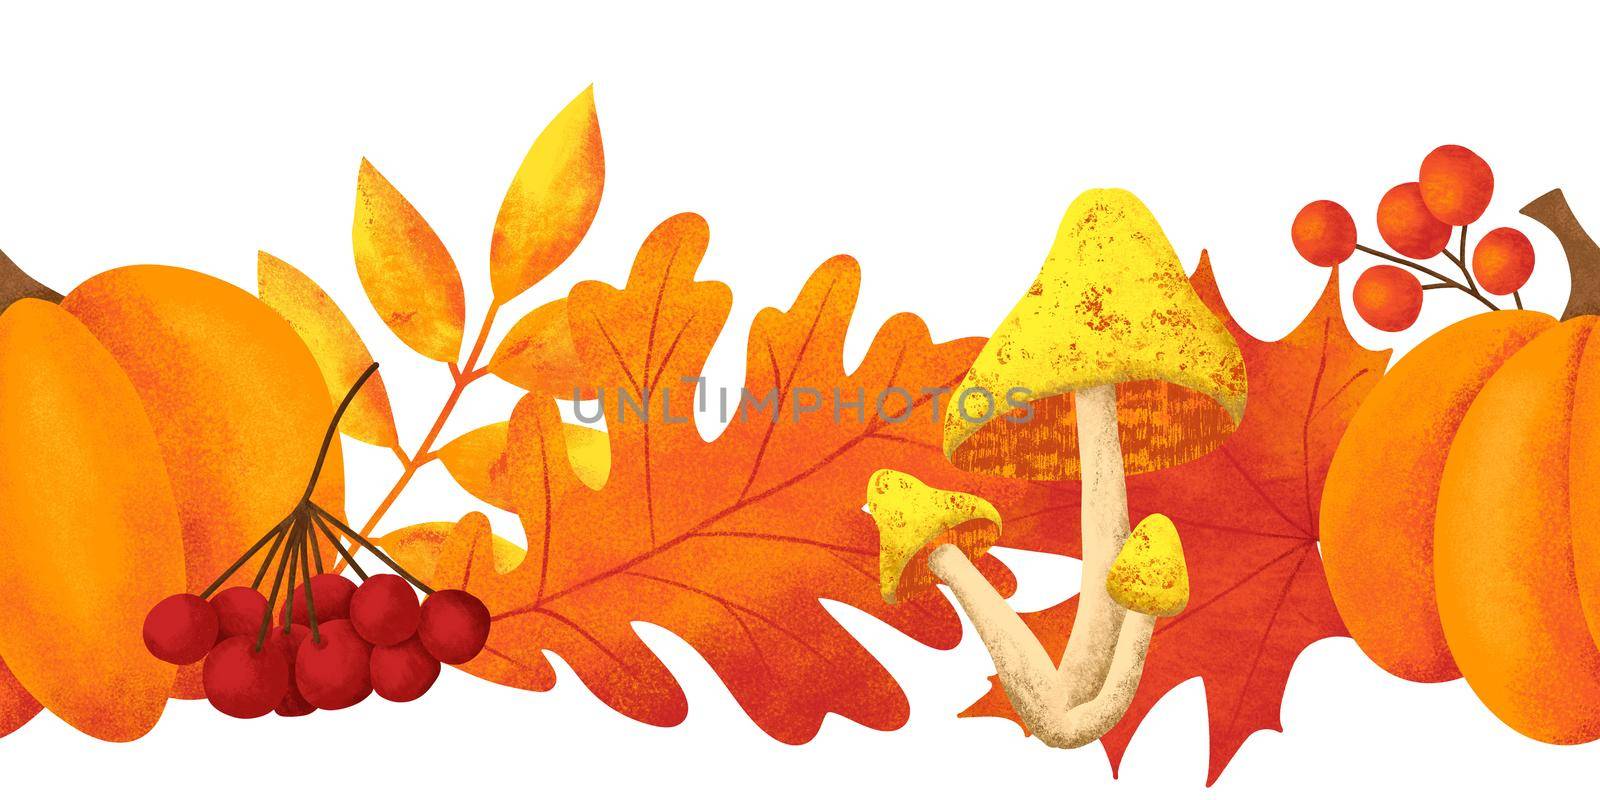 Hand drawn fall autumn seamless horizntal border with mushrooms forest wood grass leaves. Woodland frame in red orange yellow. Decorative ornament illustration. by Lagmar